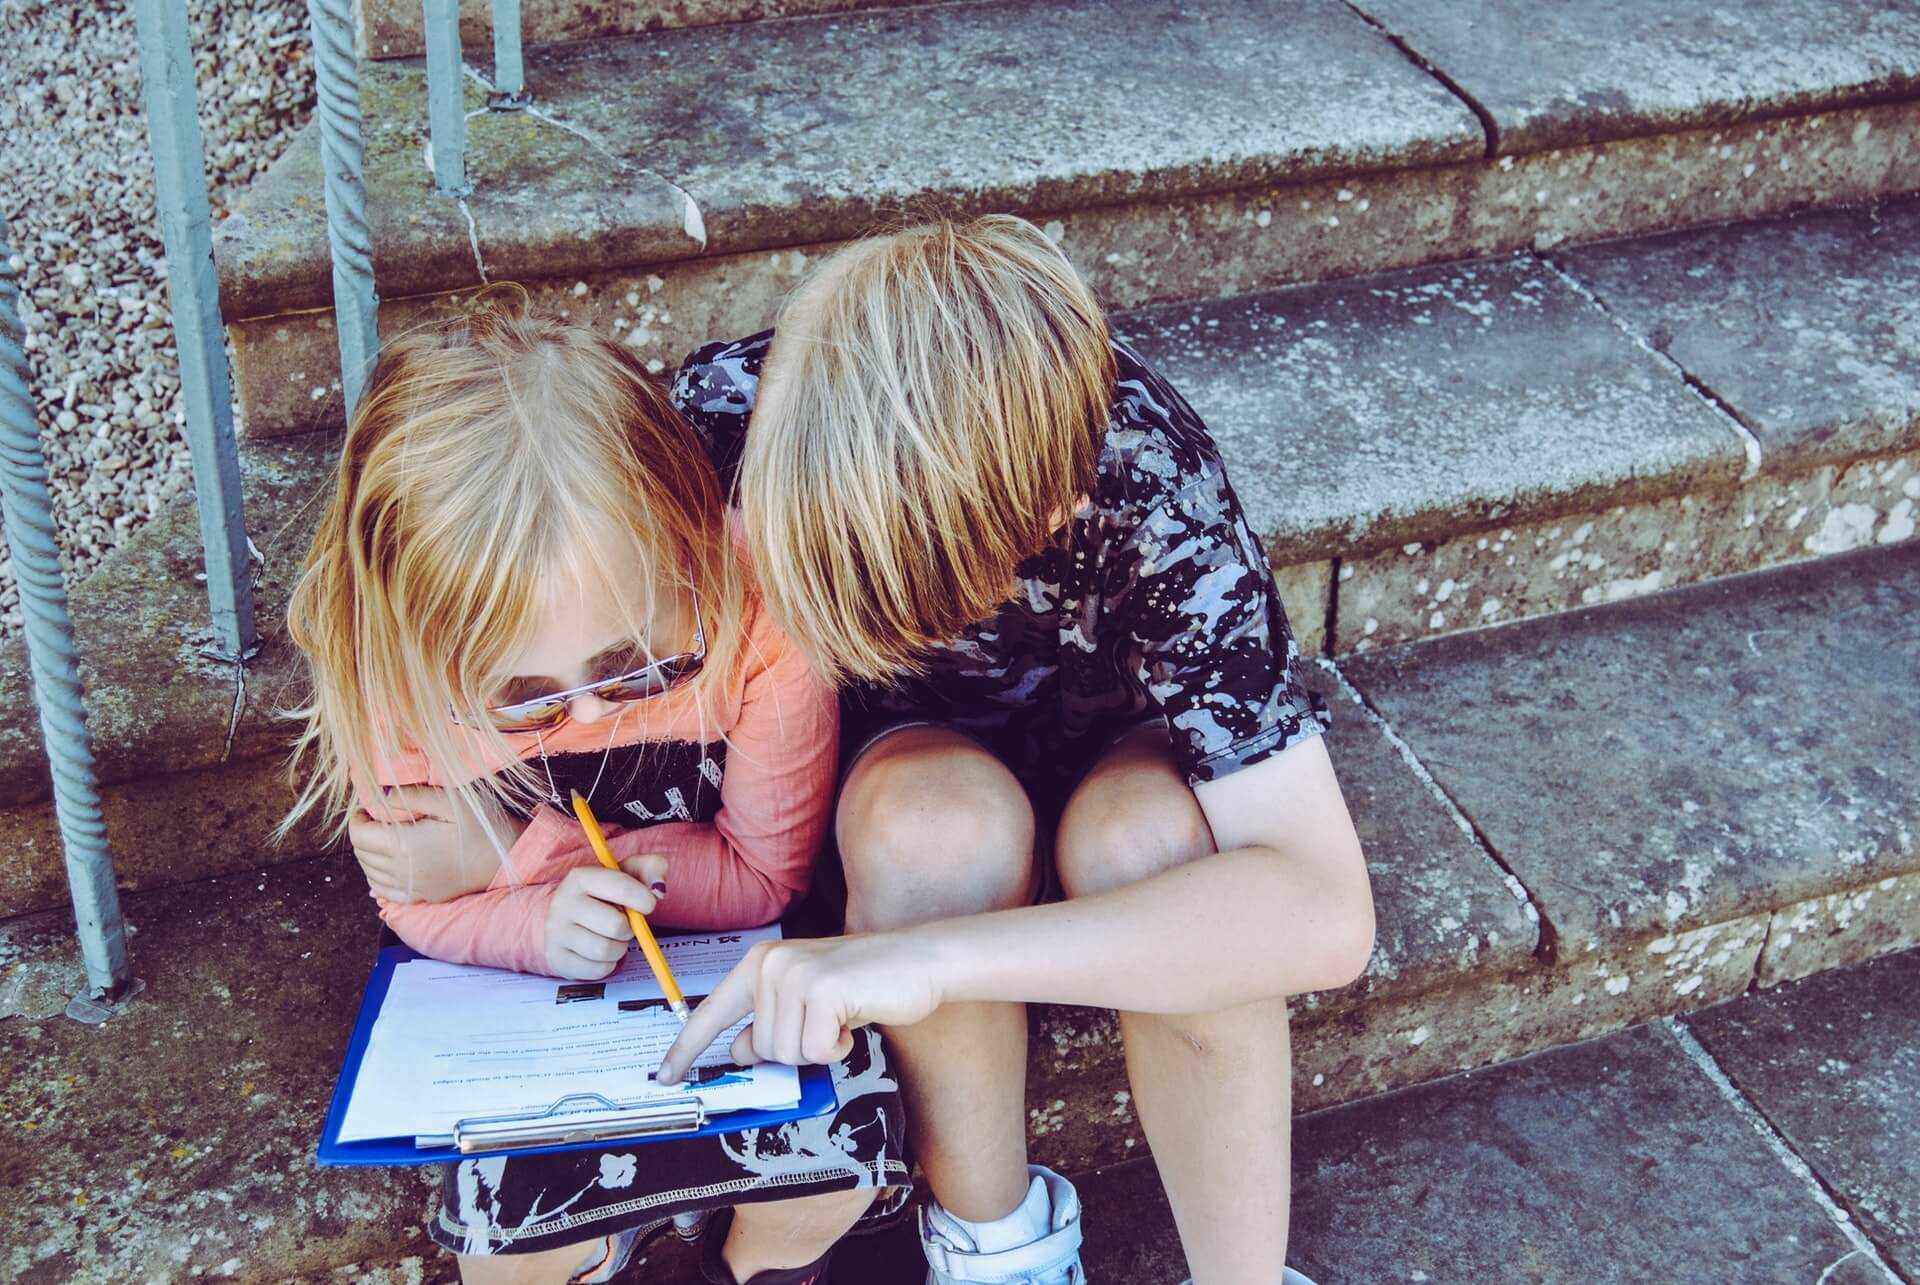 A boy is helping a girl with her homework.